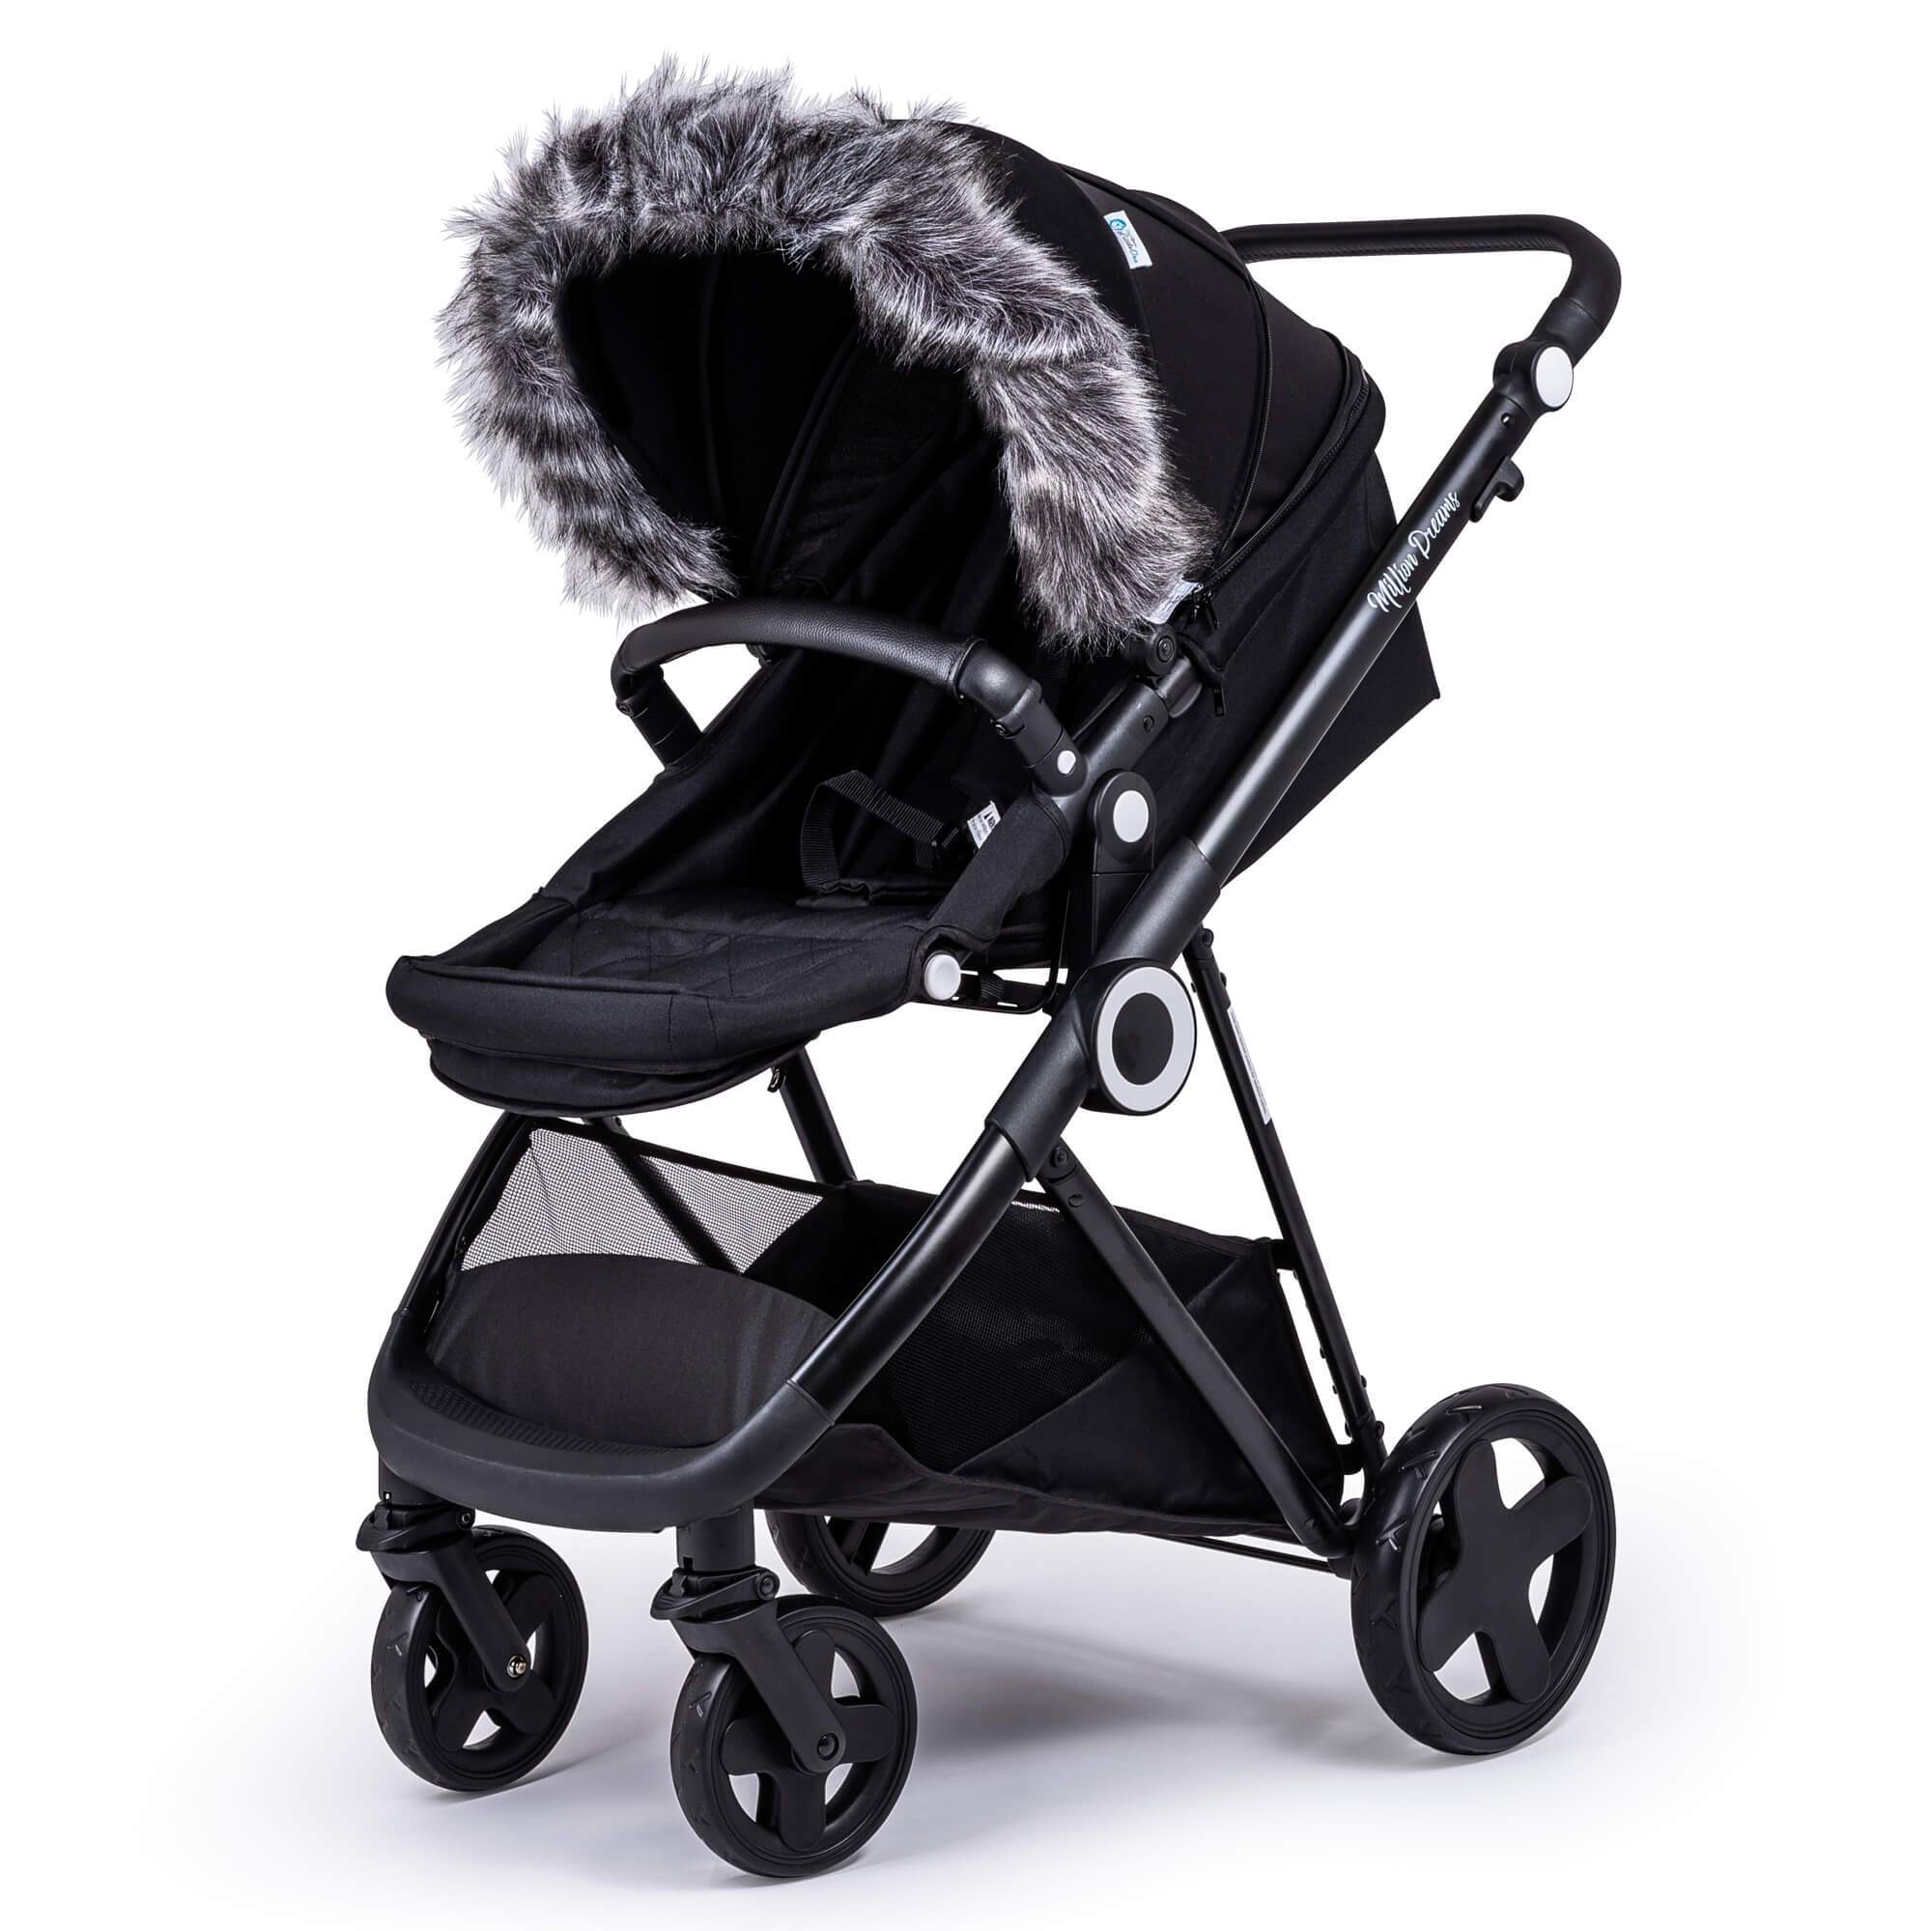 Pram Fur Hood Trim Attachment for Pushchair Compatible with Concord - Dark Grey / Fits All Models | For Your Little One